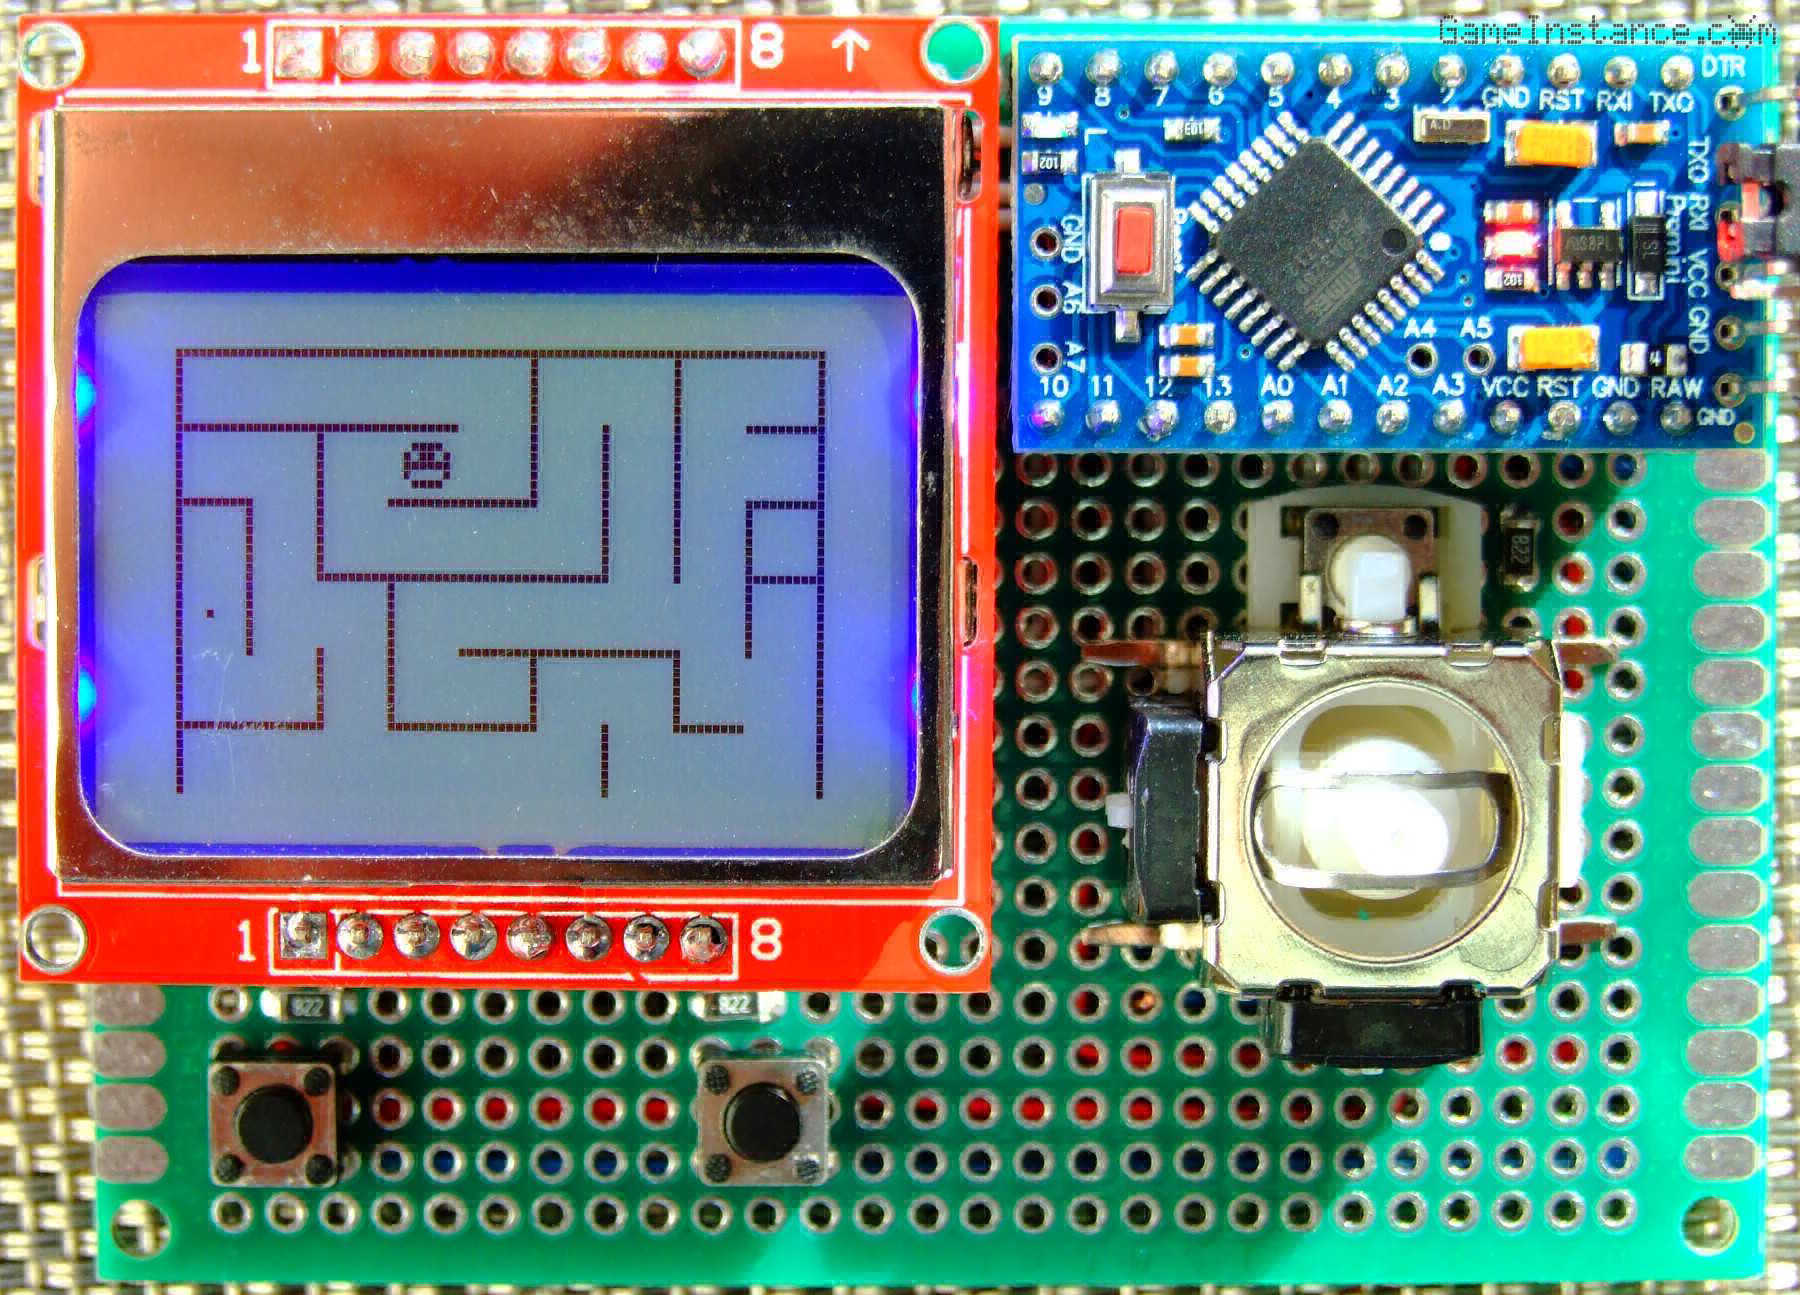 Maze Explorer game - on the first revision of the Arduino Game Console